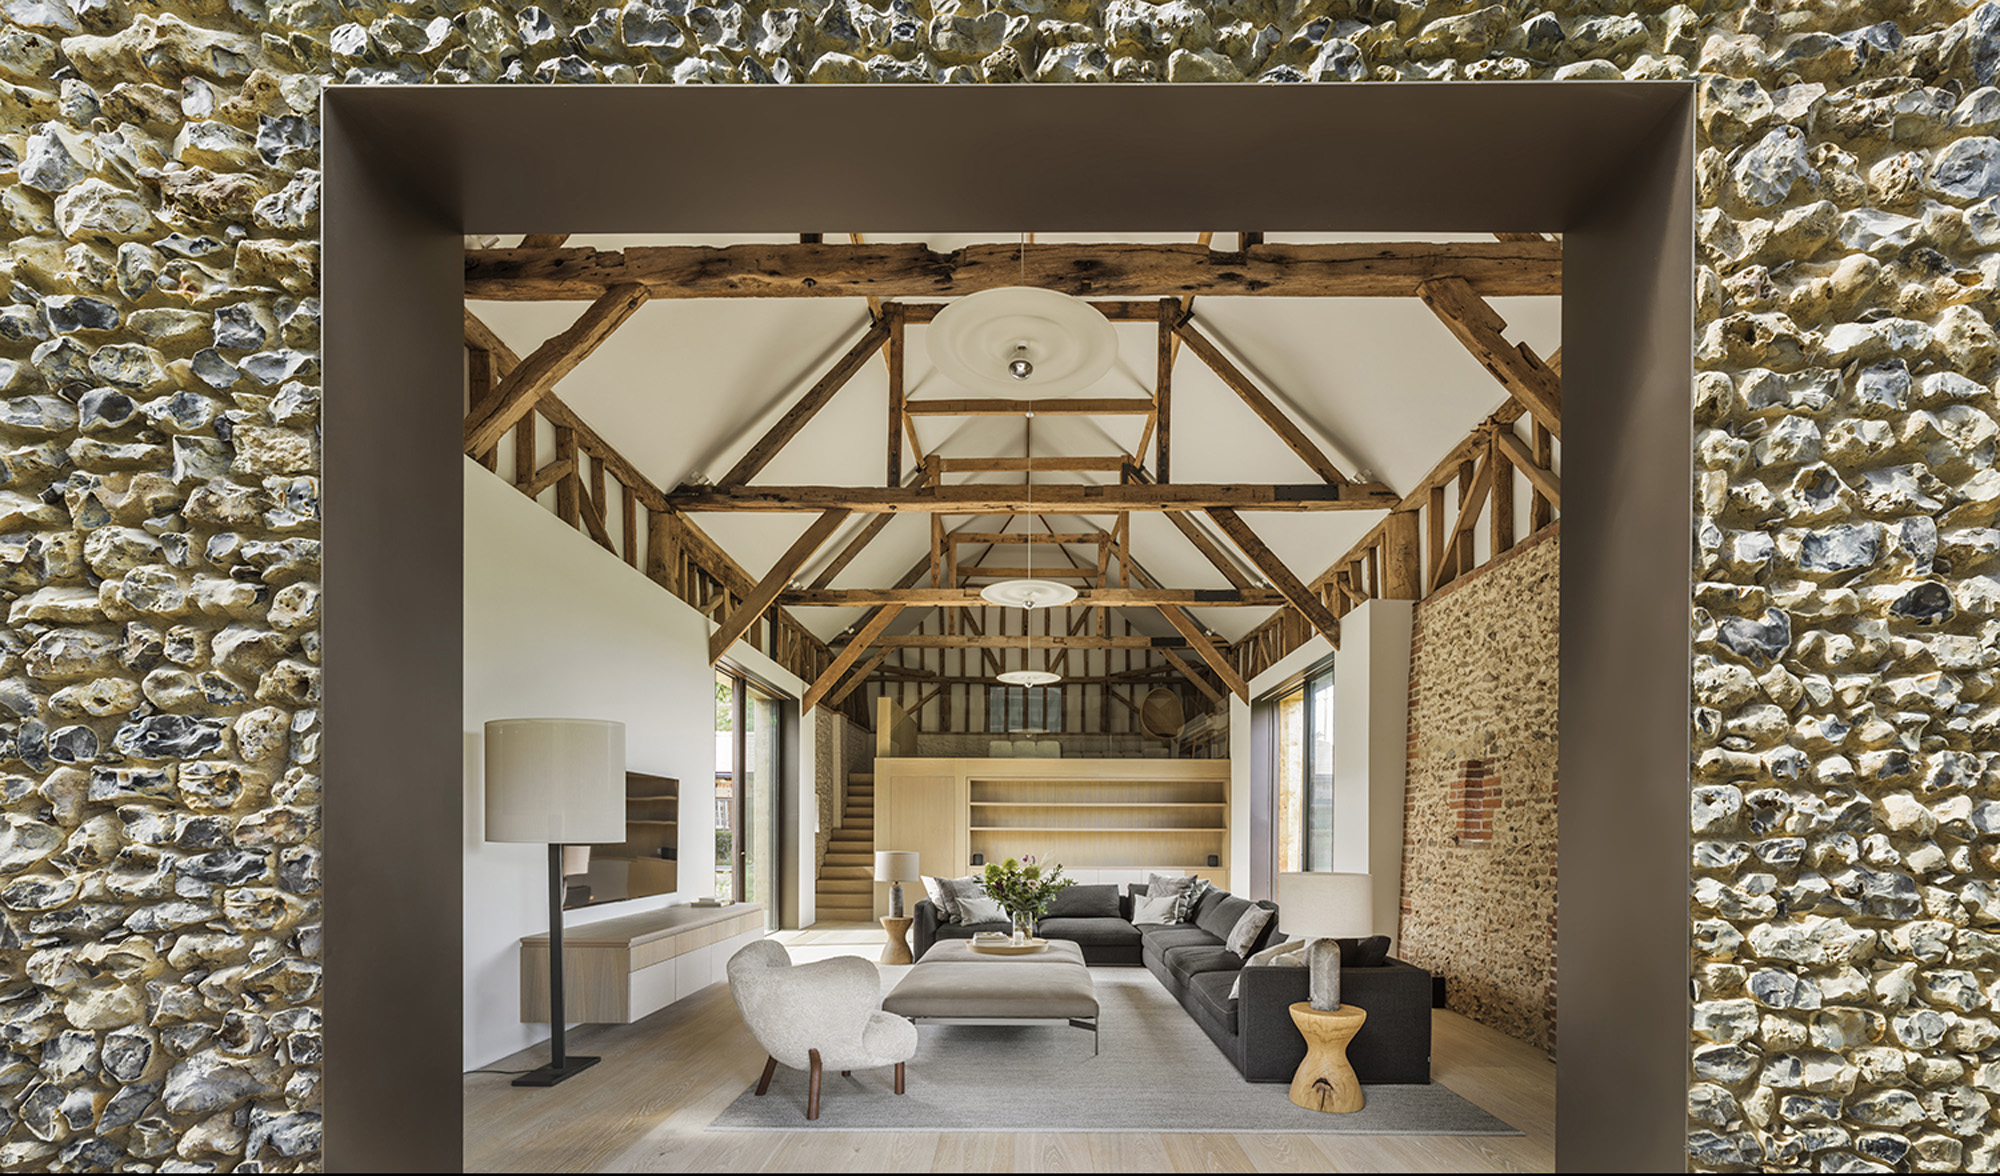 A rustic, vaulted living room